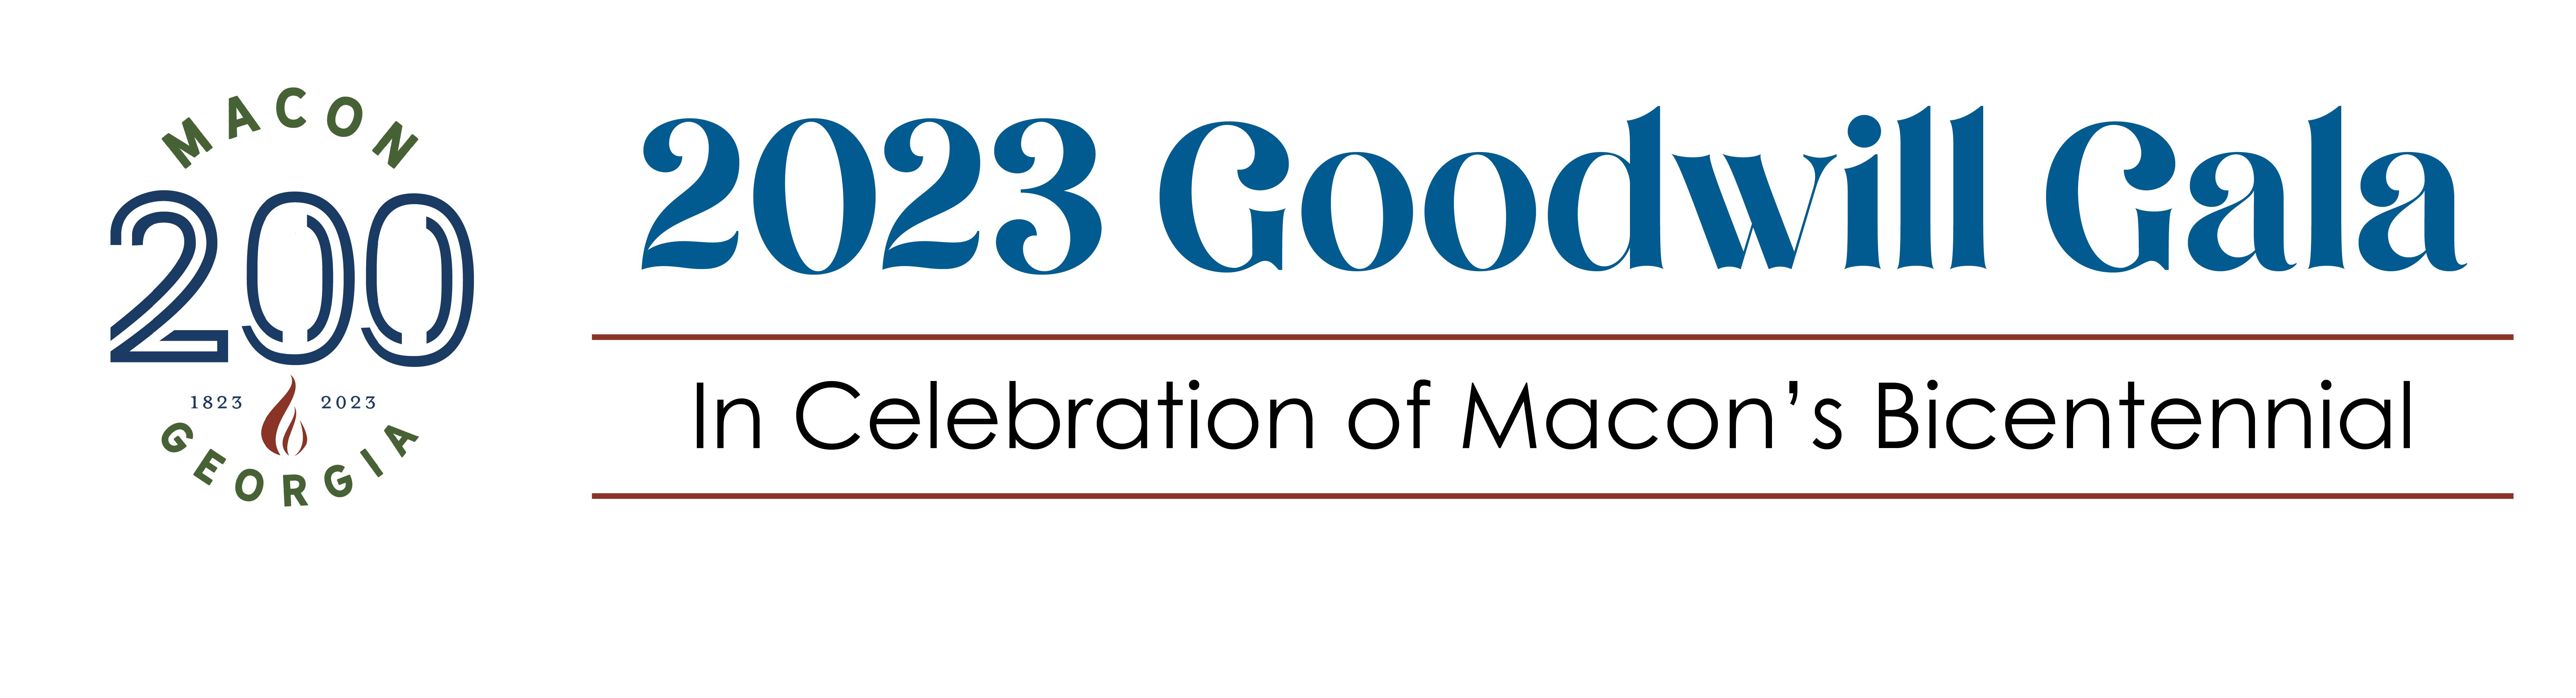 2023 Goodwill Gala Sponsorships Available!